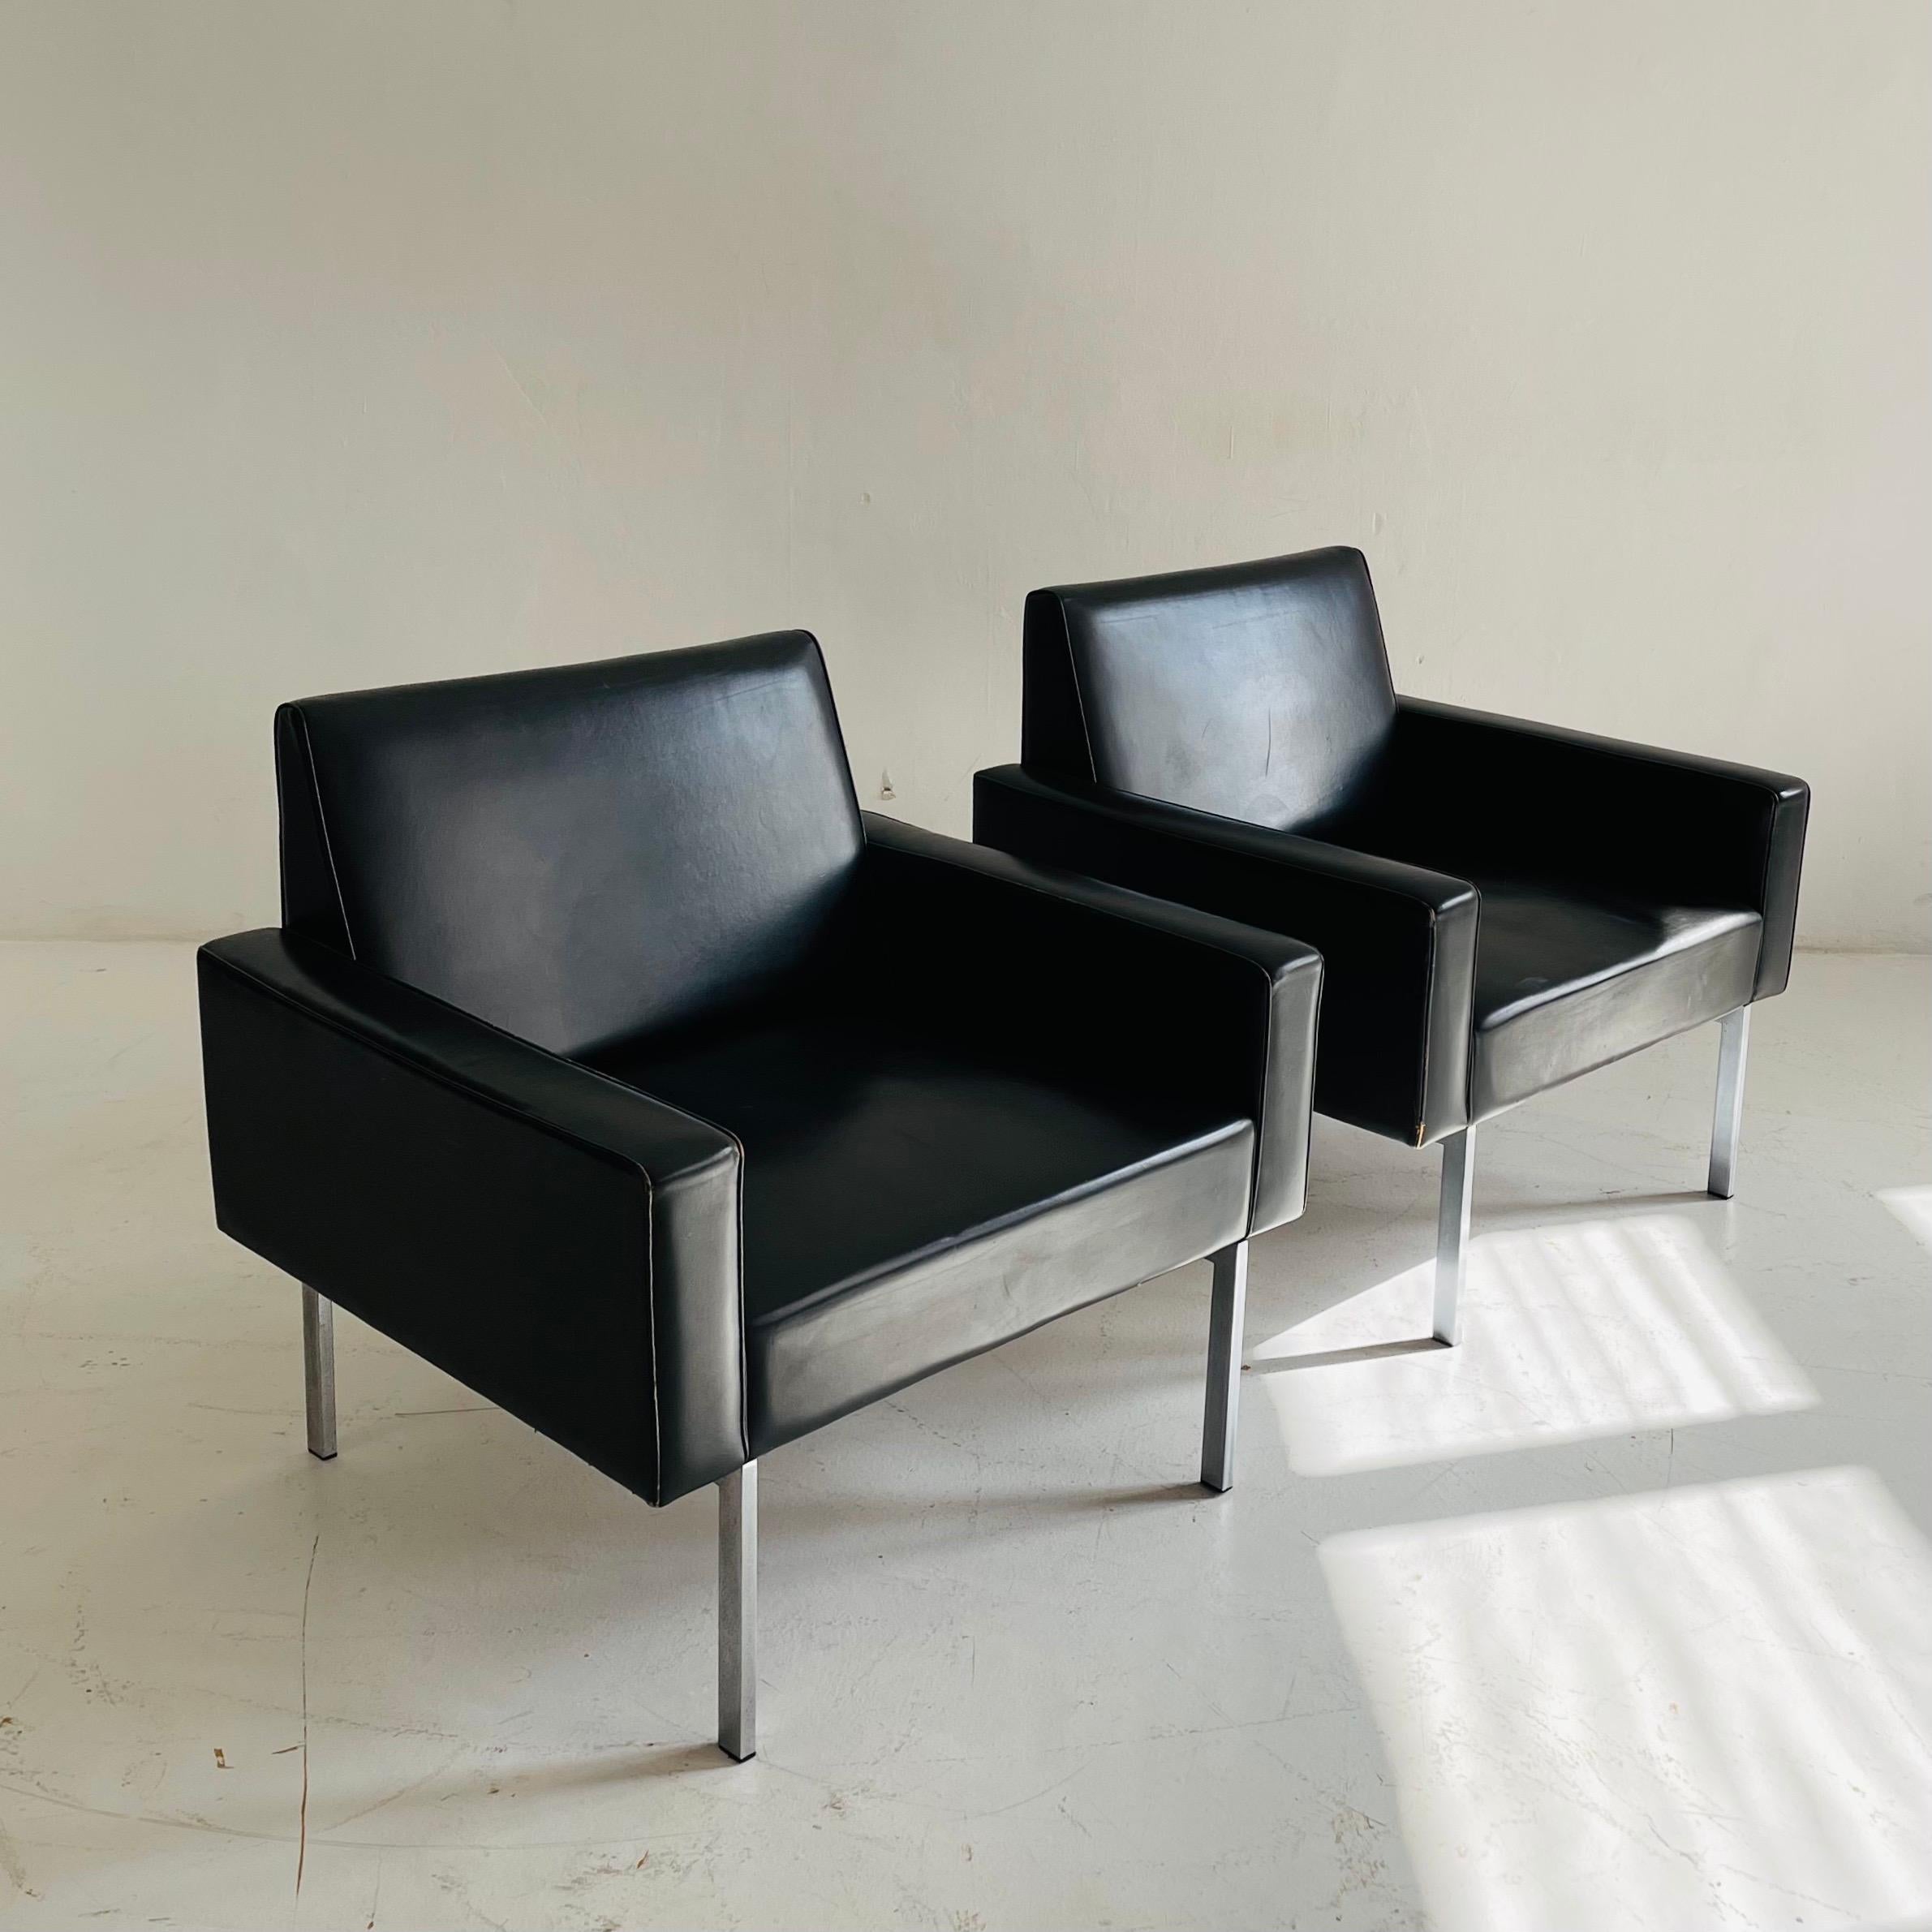 Patinated leather arm lounge chairs, Austria, 1960s.